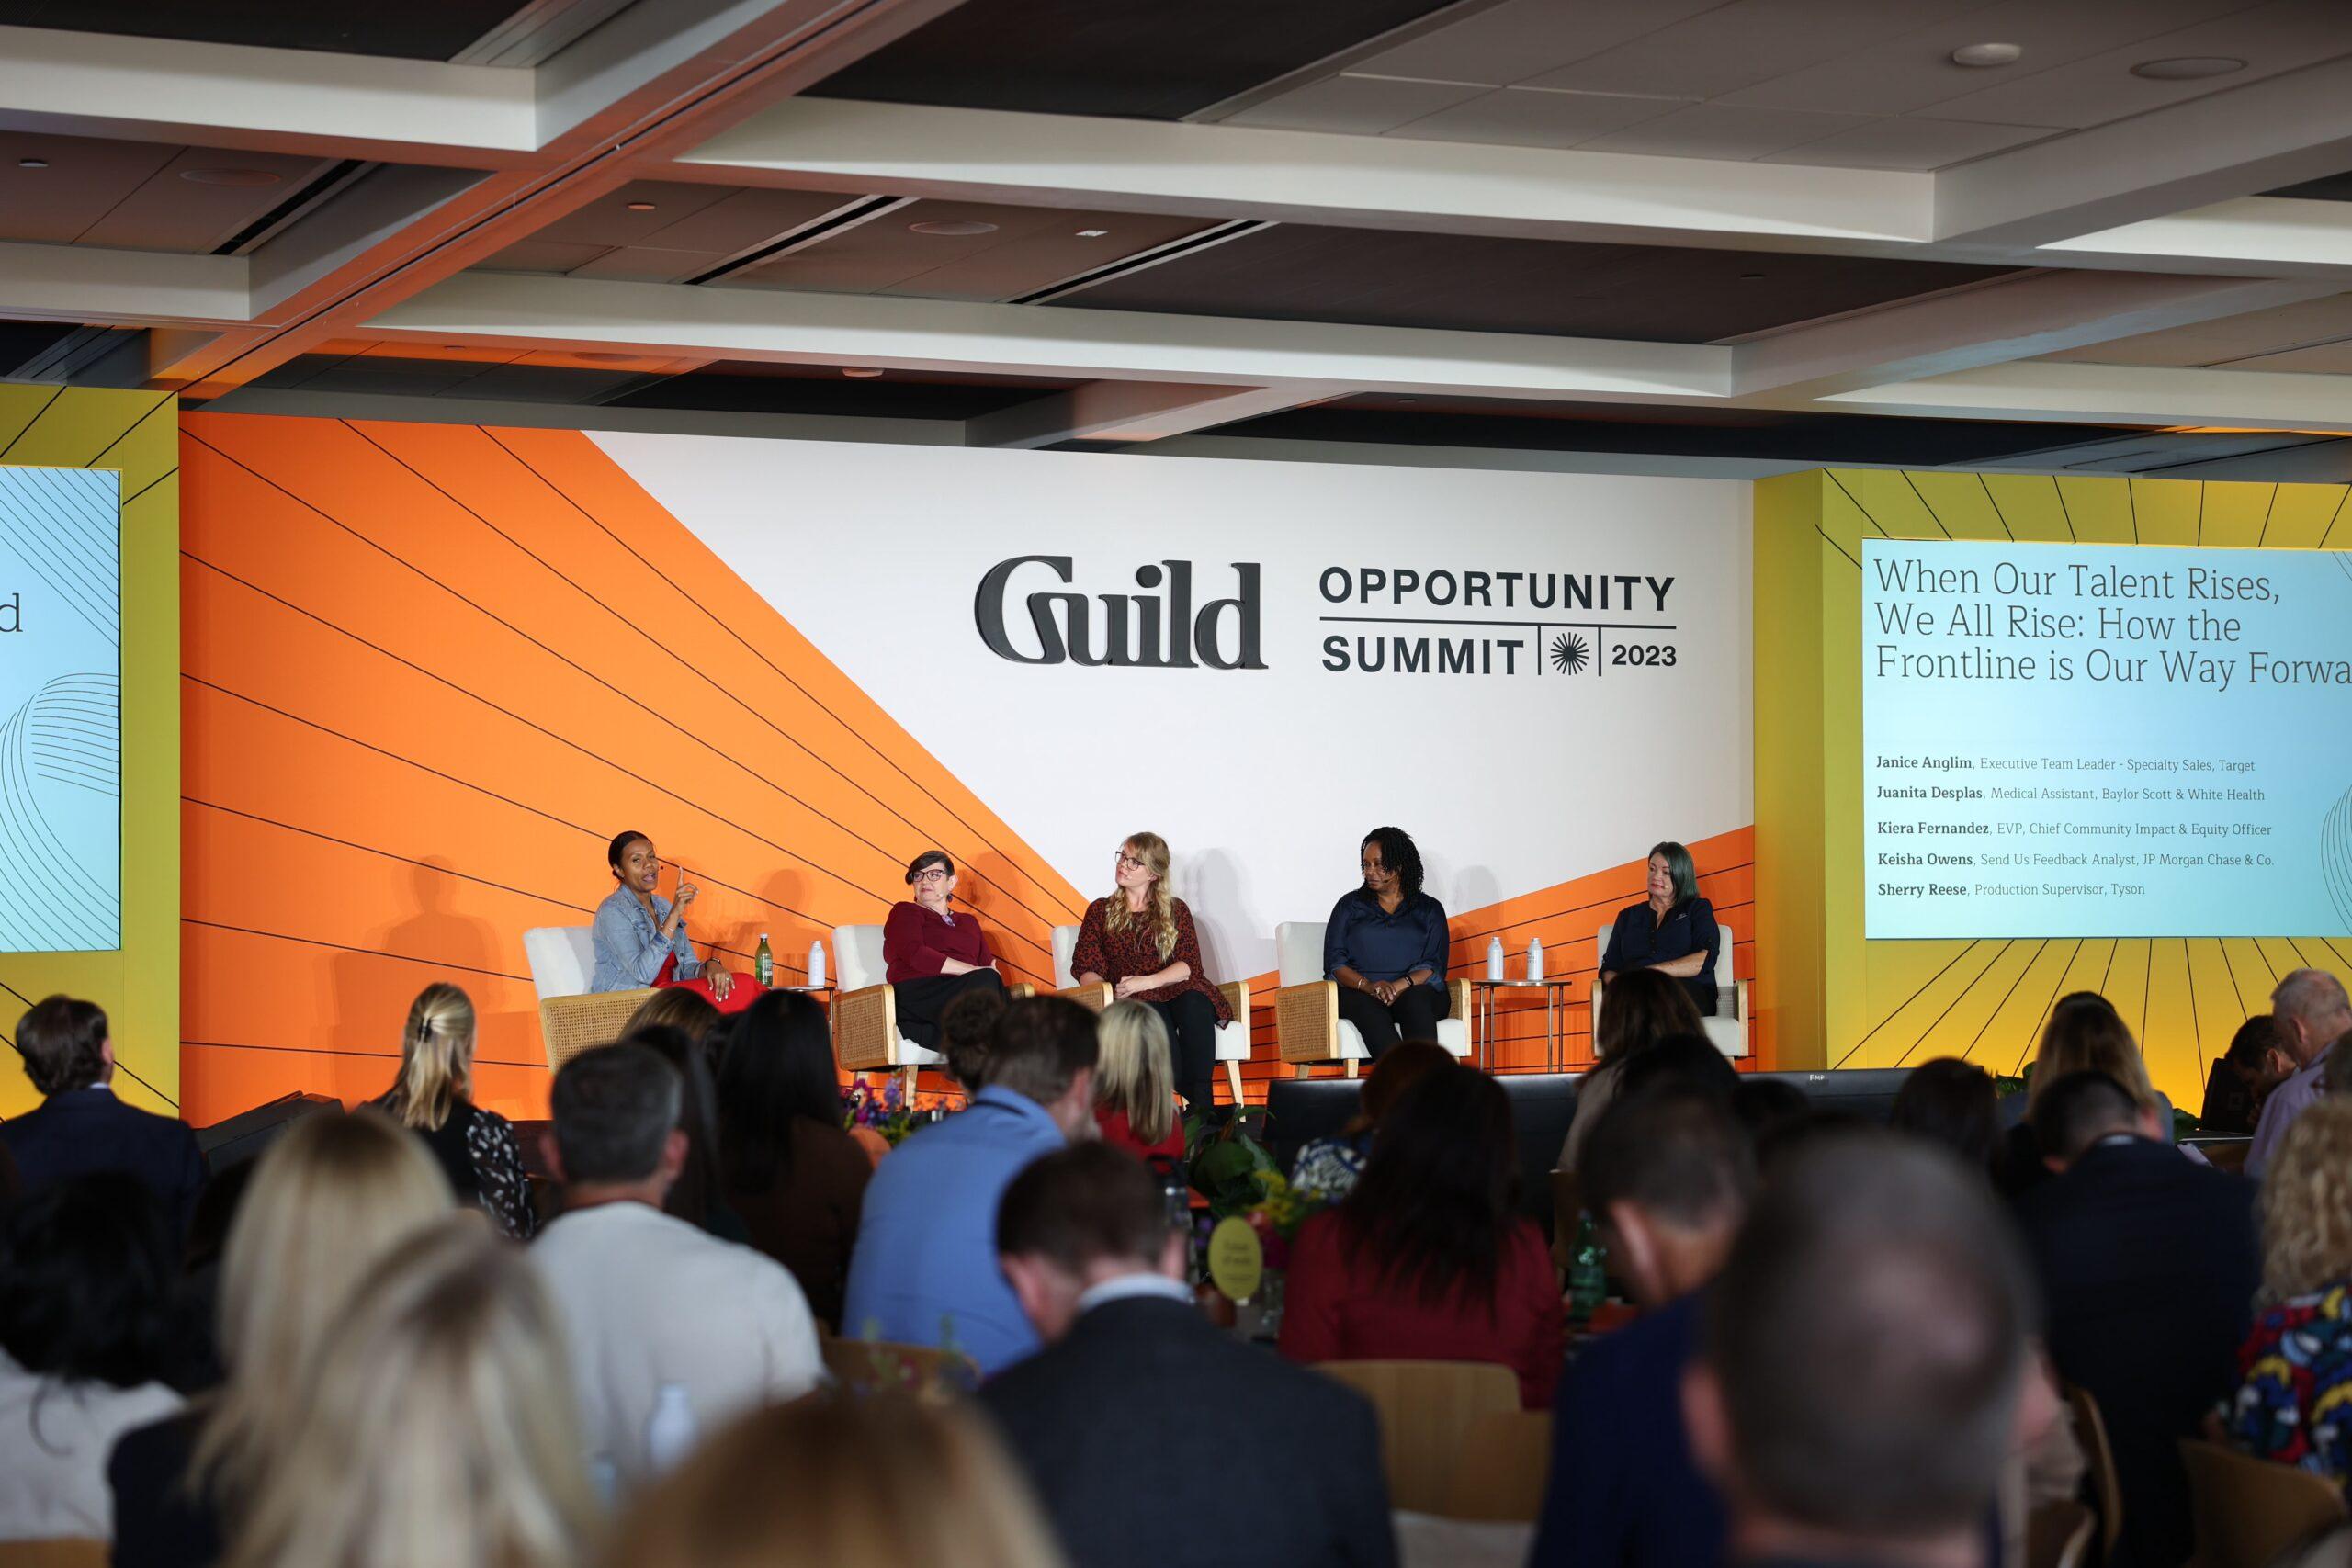 Panelists on the stage at the Guild Opportunity Summit 2023